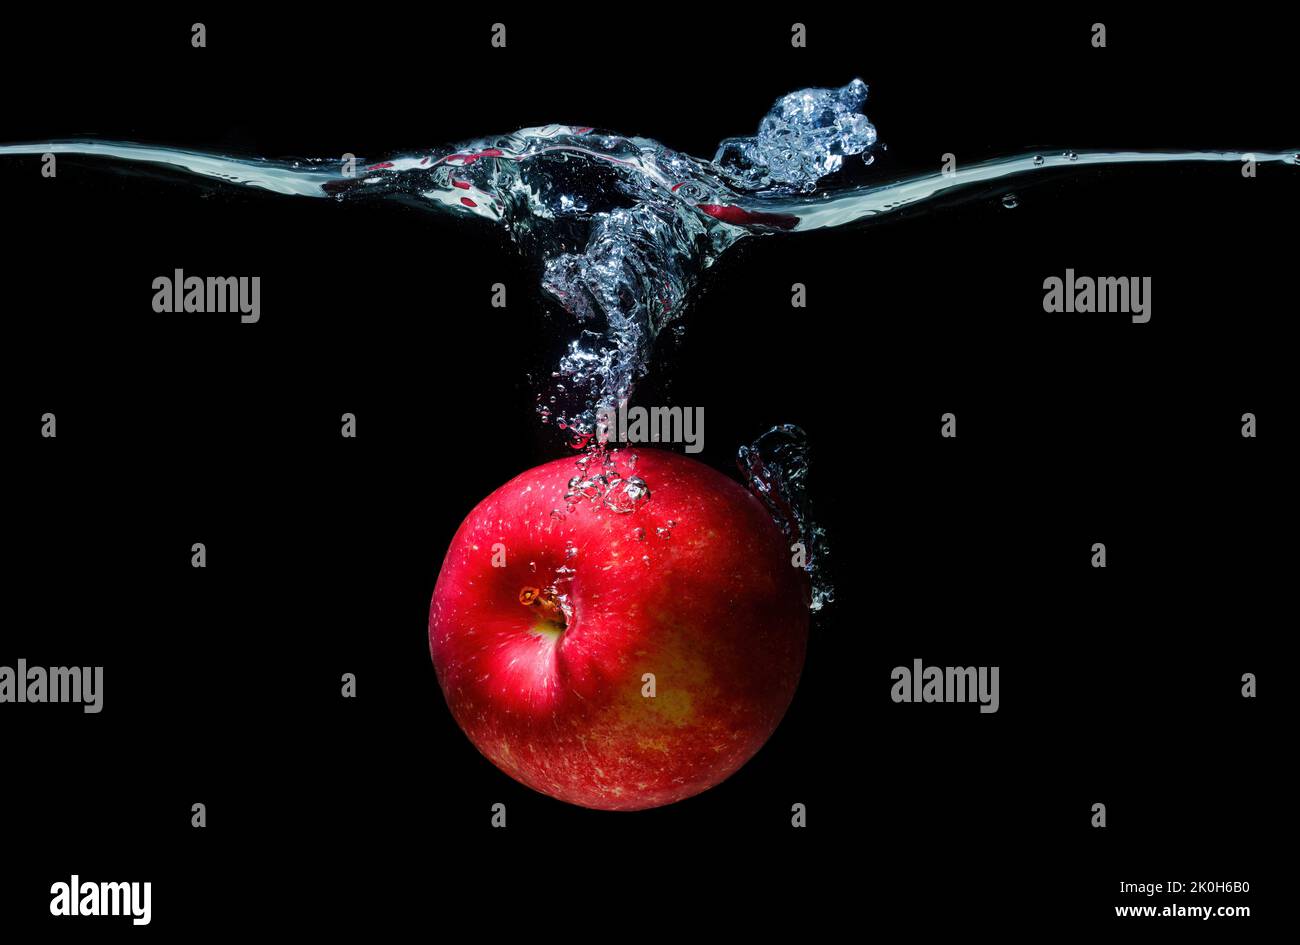 Fresh red apple dropped in water with splashes isolated on black background. Stock Photo